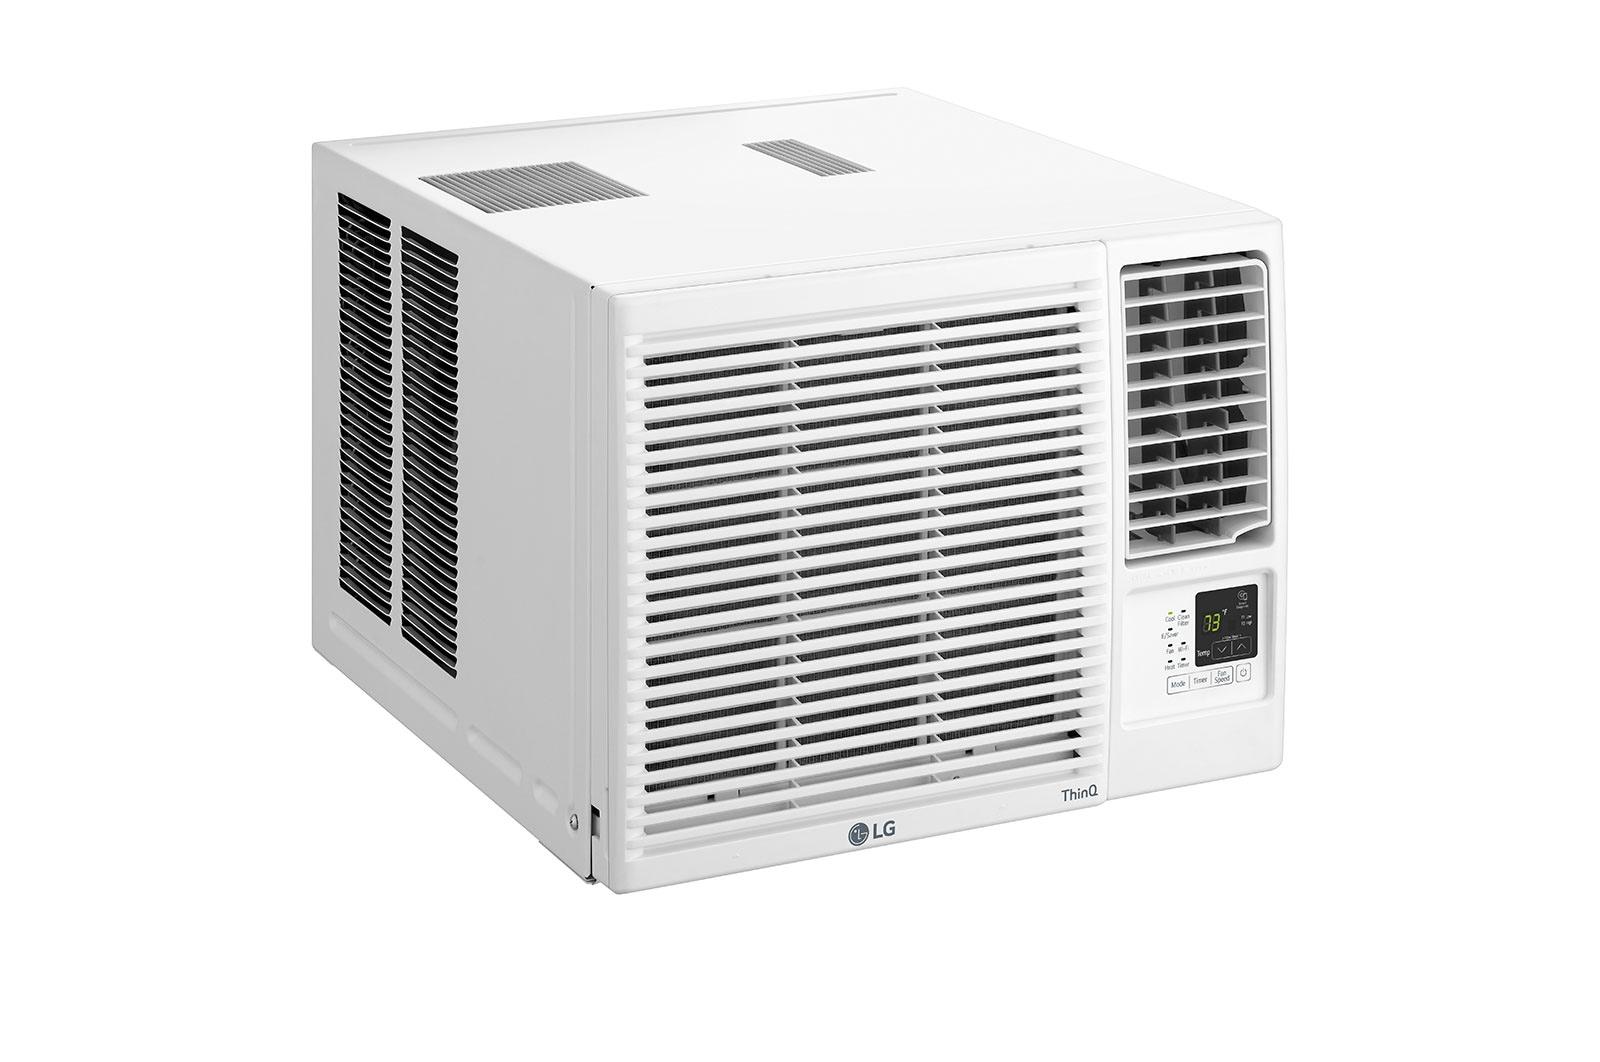 LG 7,500 BTU Smart Wi-Fi Enabled Window Air Conditioner, Cooling & Heating